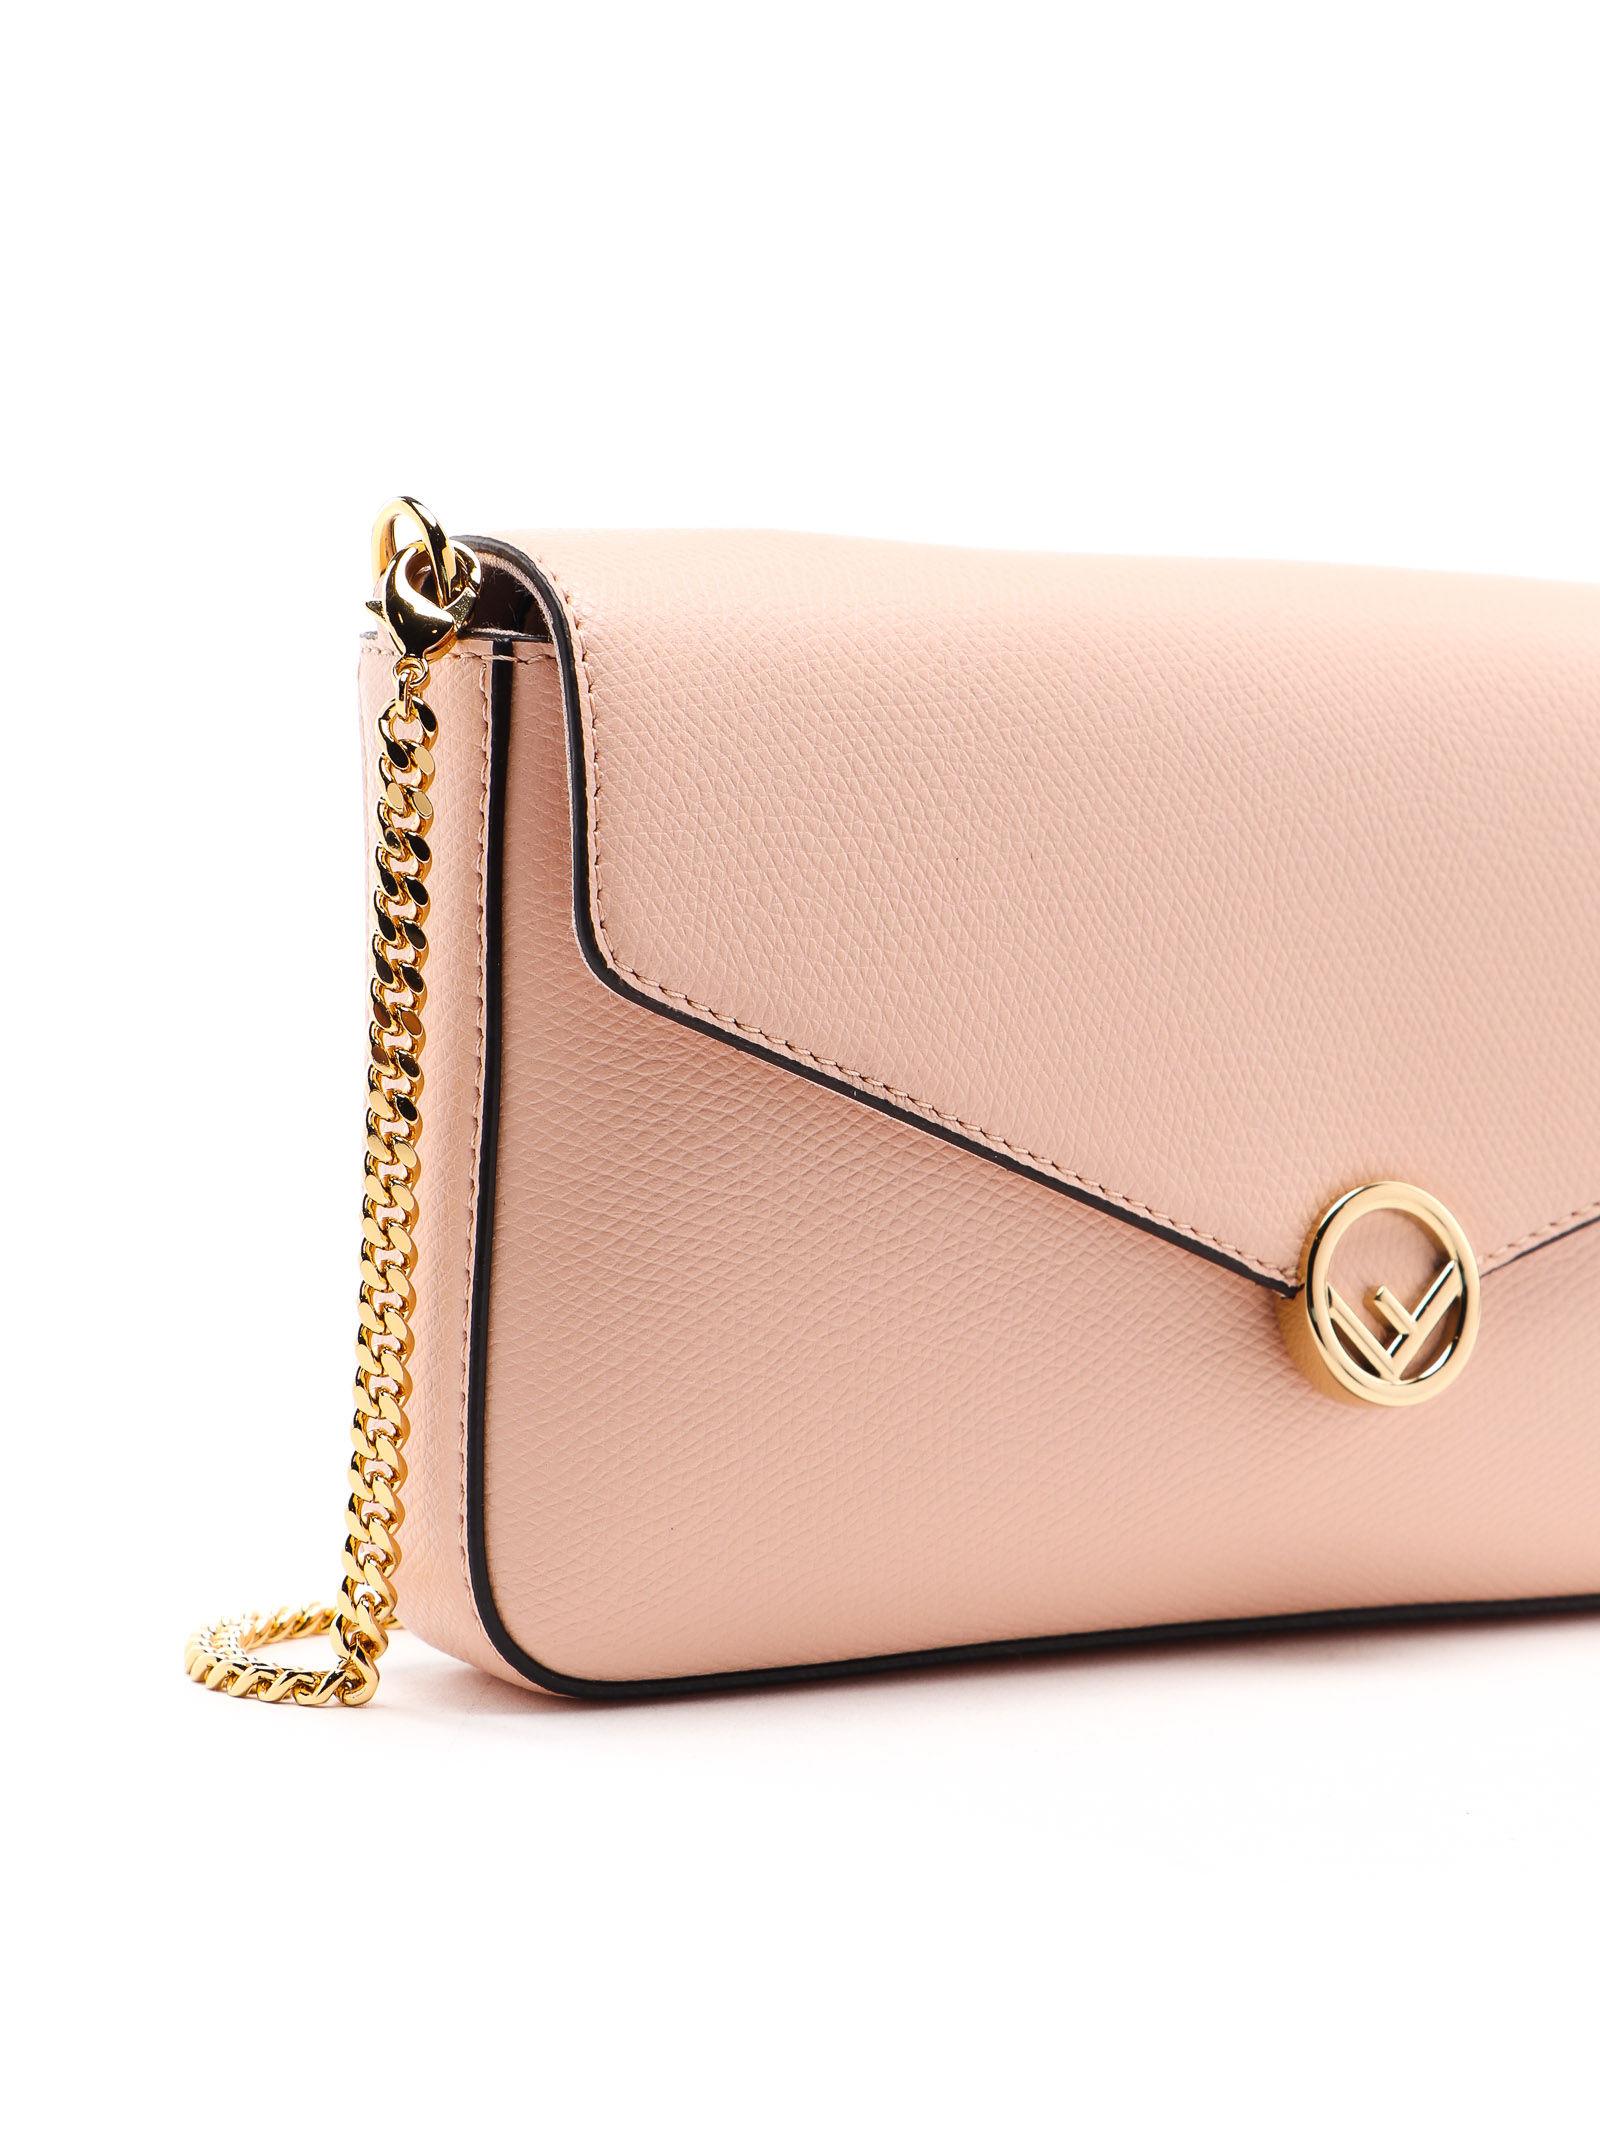 Fendi Leather Wallet On Chain in Light Pink (Pink) - Lyst